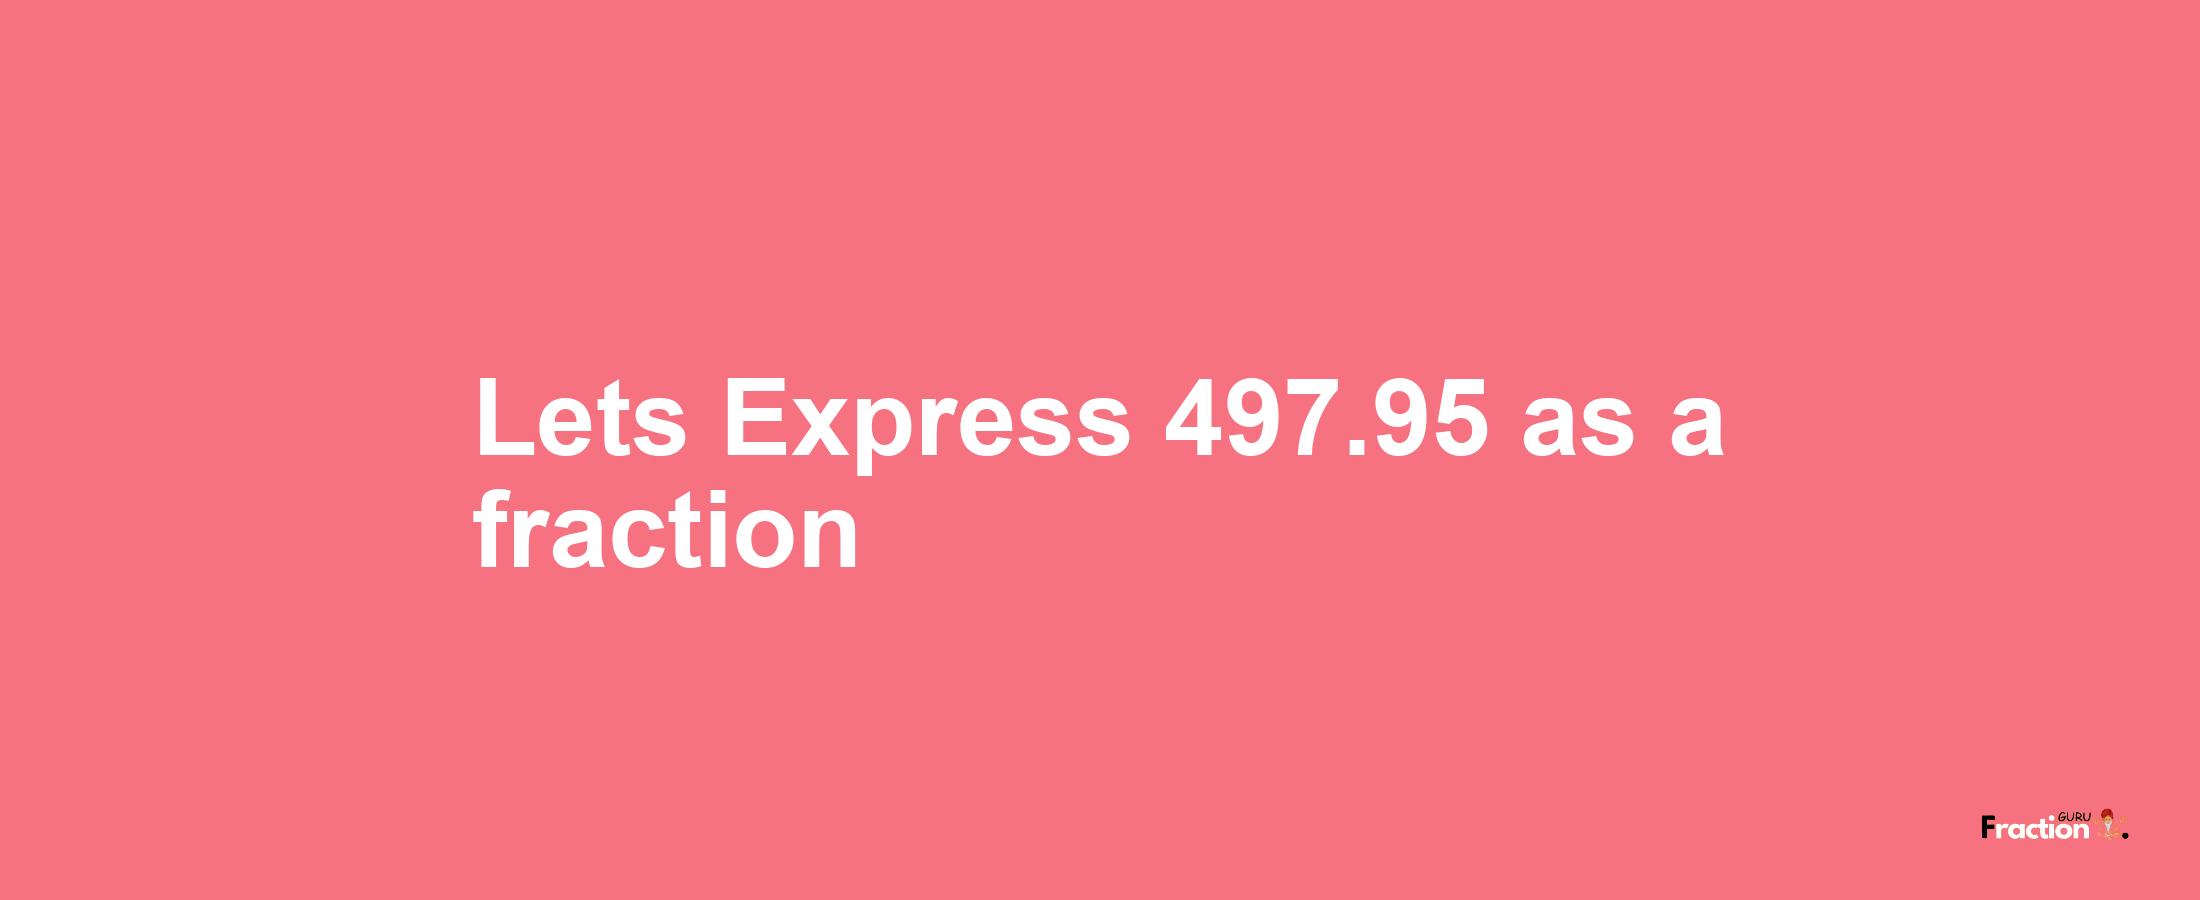 Lets Express 497.95 as afraction